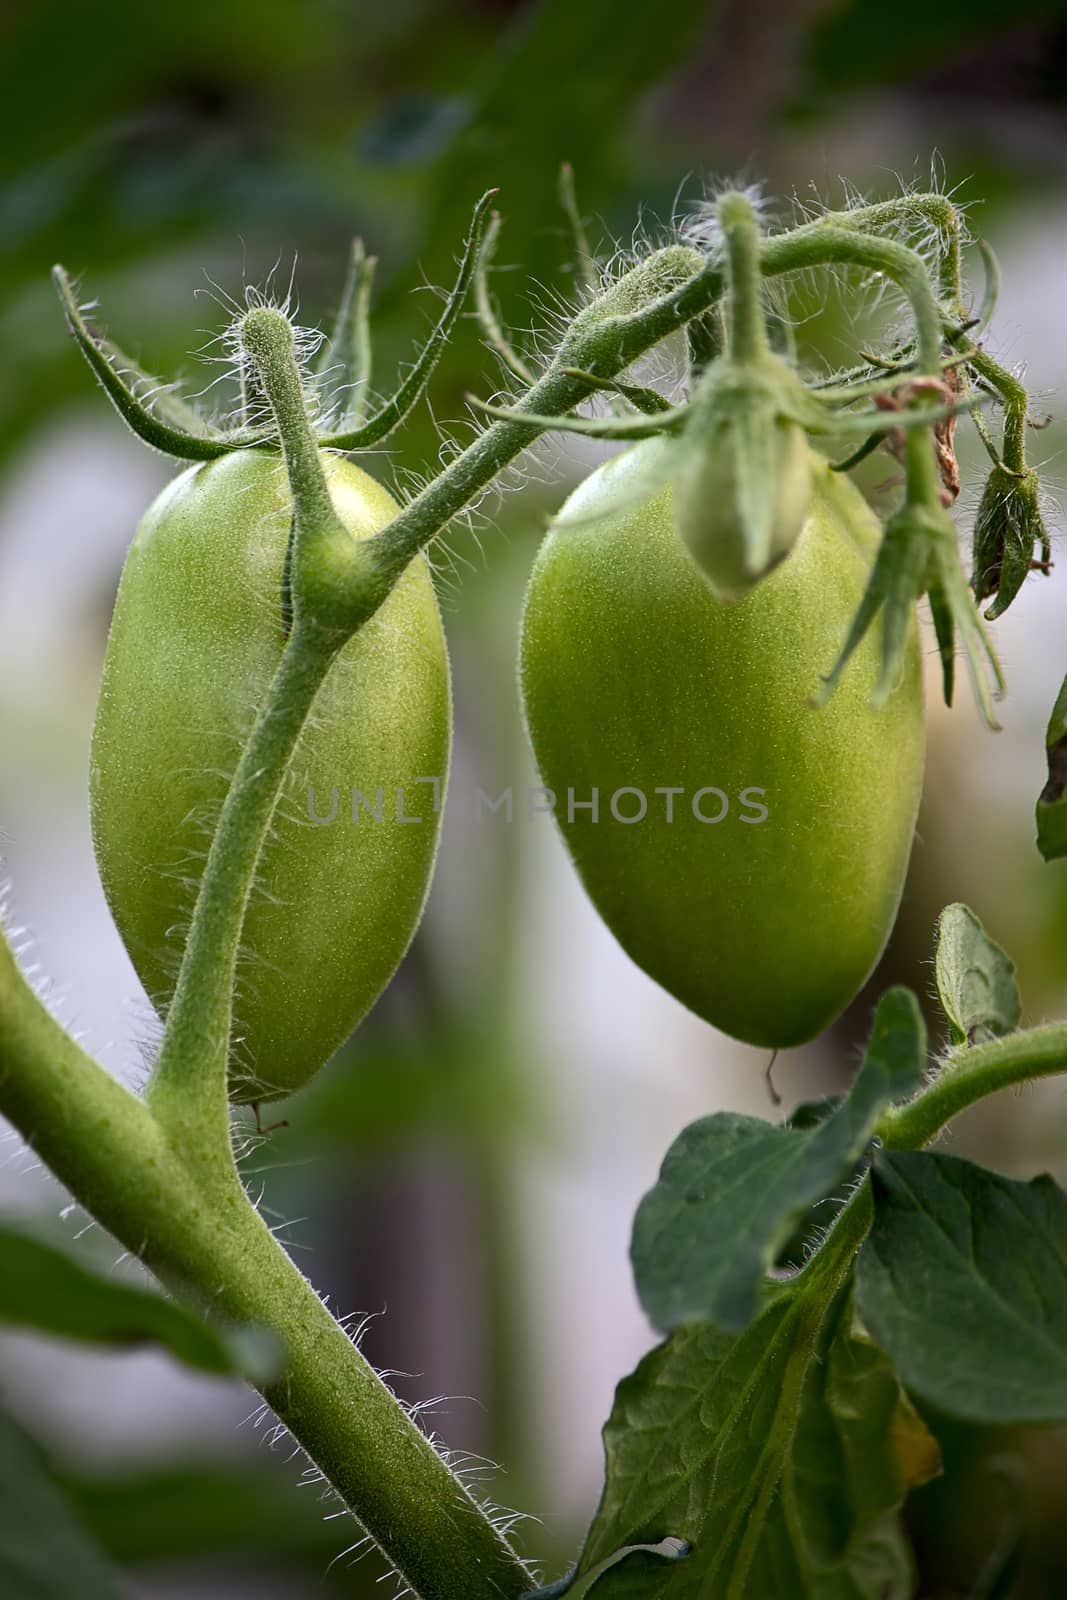 Green tomatoes  close-up on  plant in  garden.